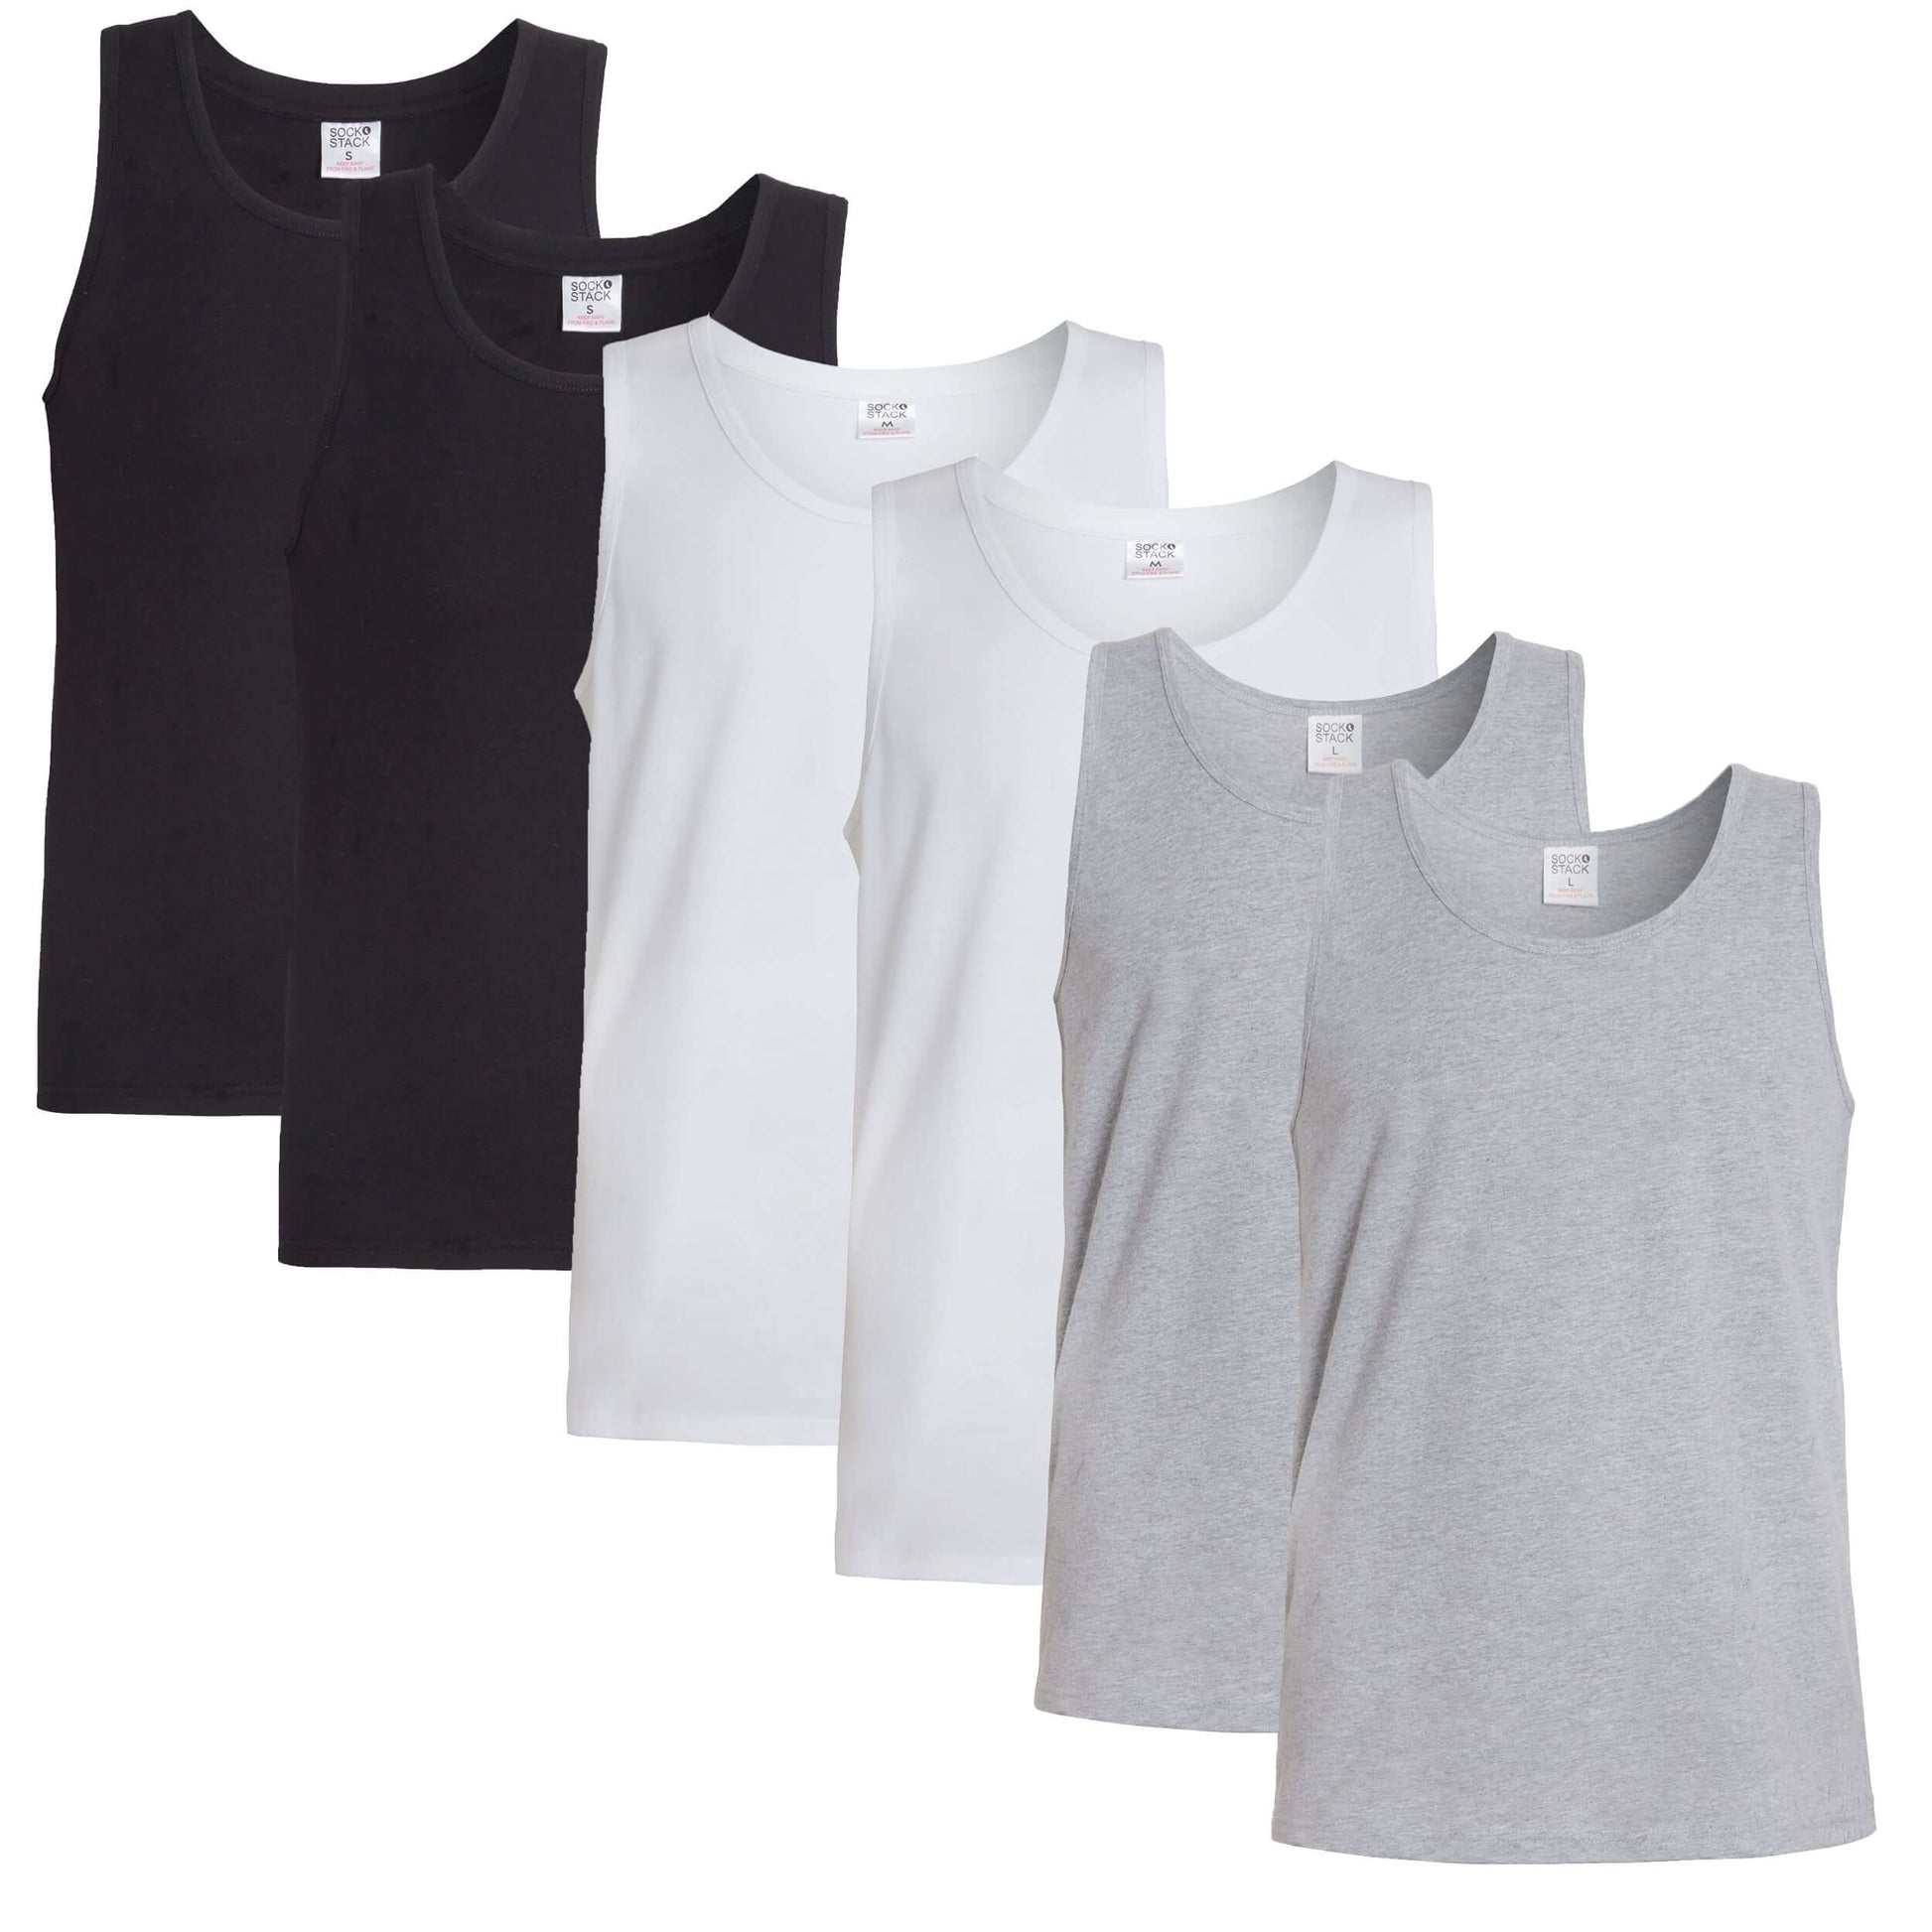 Pack of 6 Men's Vest, Fitted Plain Muscle Gym Summer Top Vests. Buy now for £10.00. A Vests by Sock Stack. assorted, athletics, black, boys, breathable, clothing, comfortable, cotton, dressing, grey, gym, home, medium, mens, navy, outdoor, polyester, runn